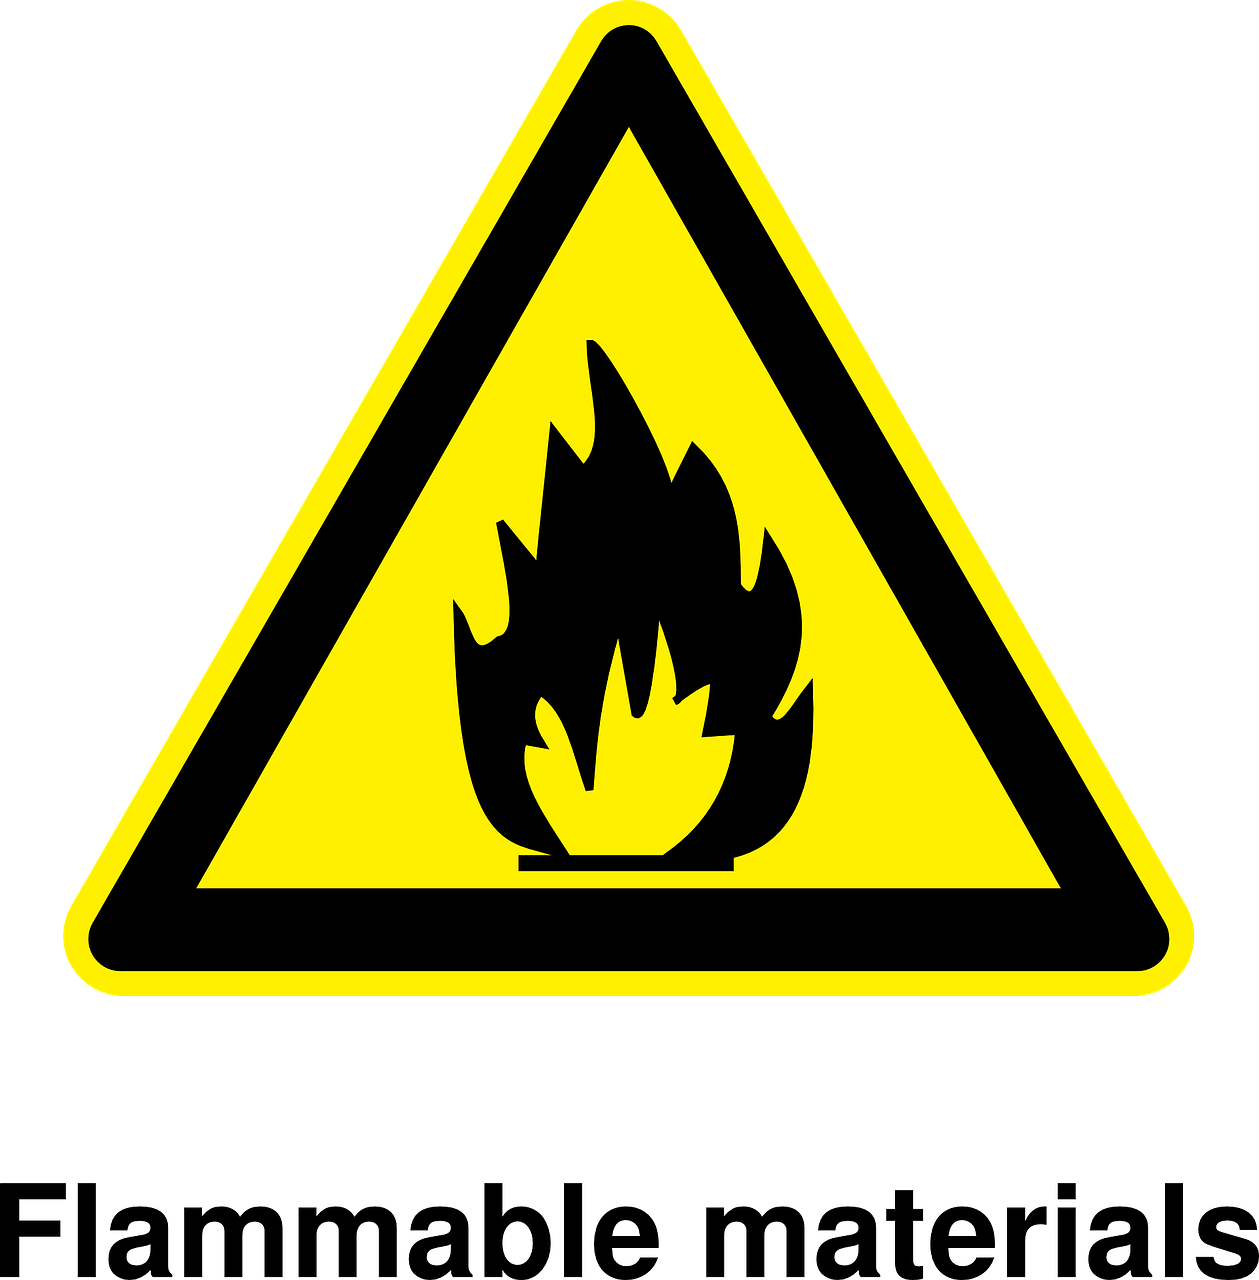 a yellow and black sign that says flamma flamma flamma flamma flamma flamma flamma, synthetic materials, warning, on a black background, iso: 400